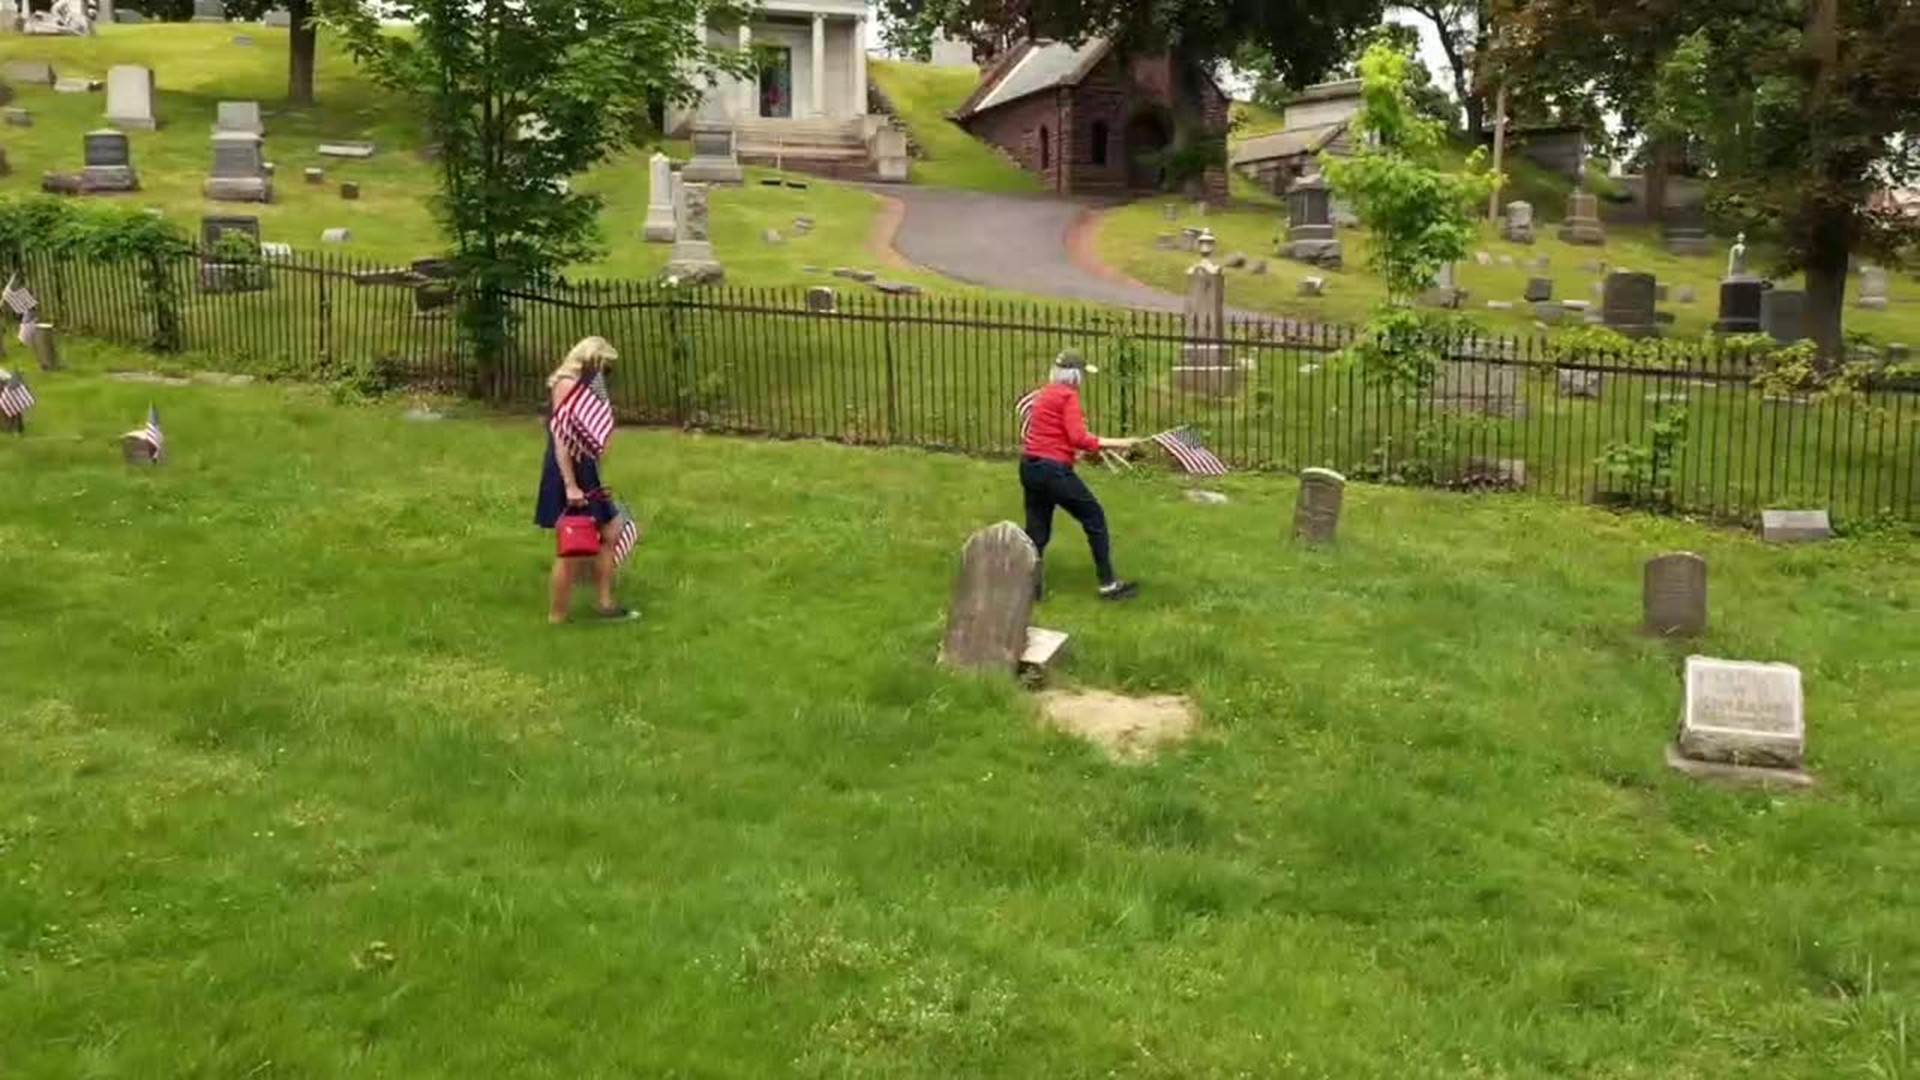 Volunteers hope to care for the gravesites in the city's historic cemetery along North River Street.